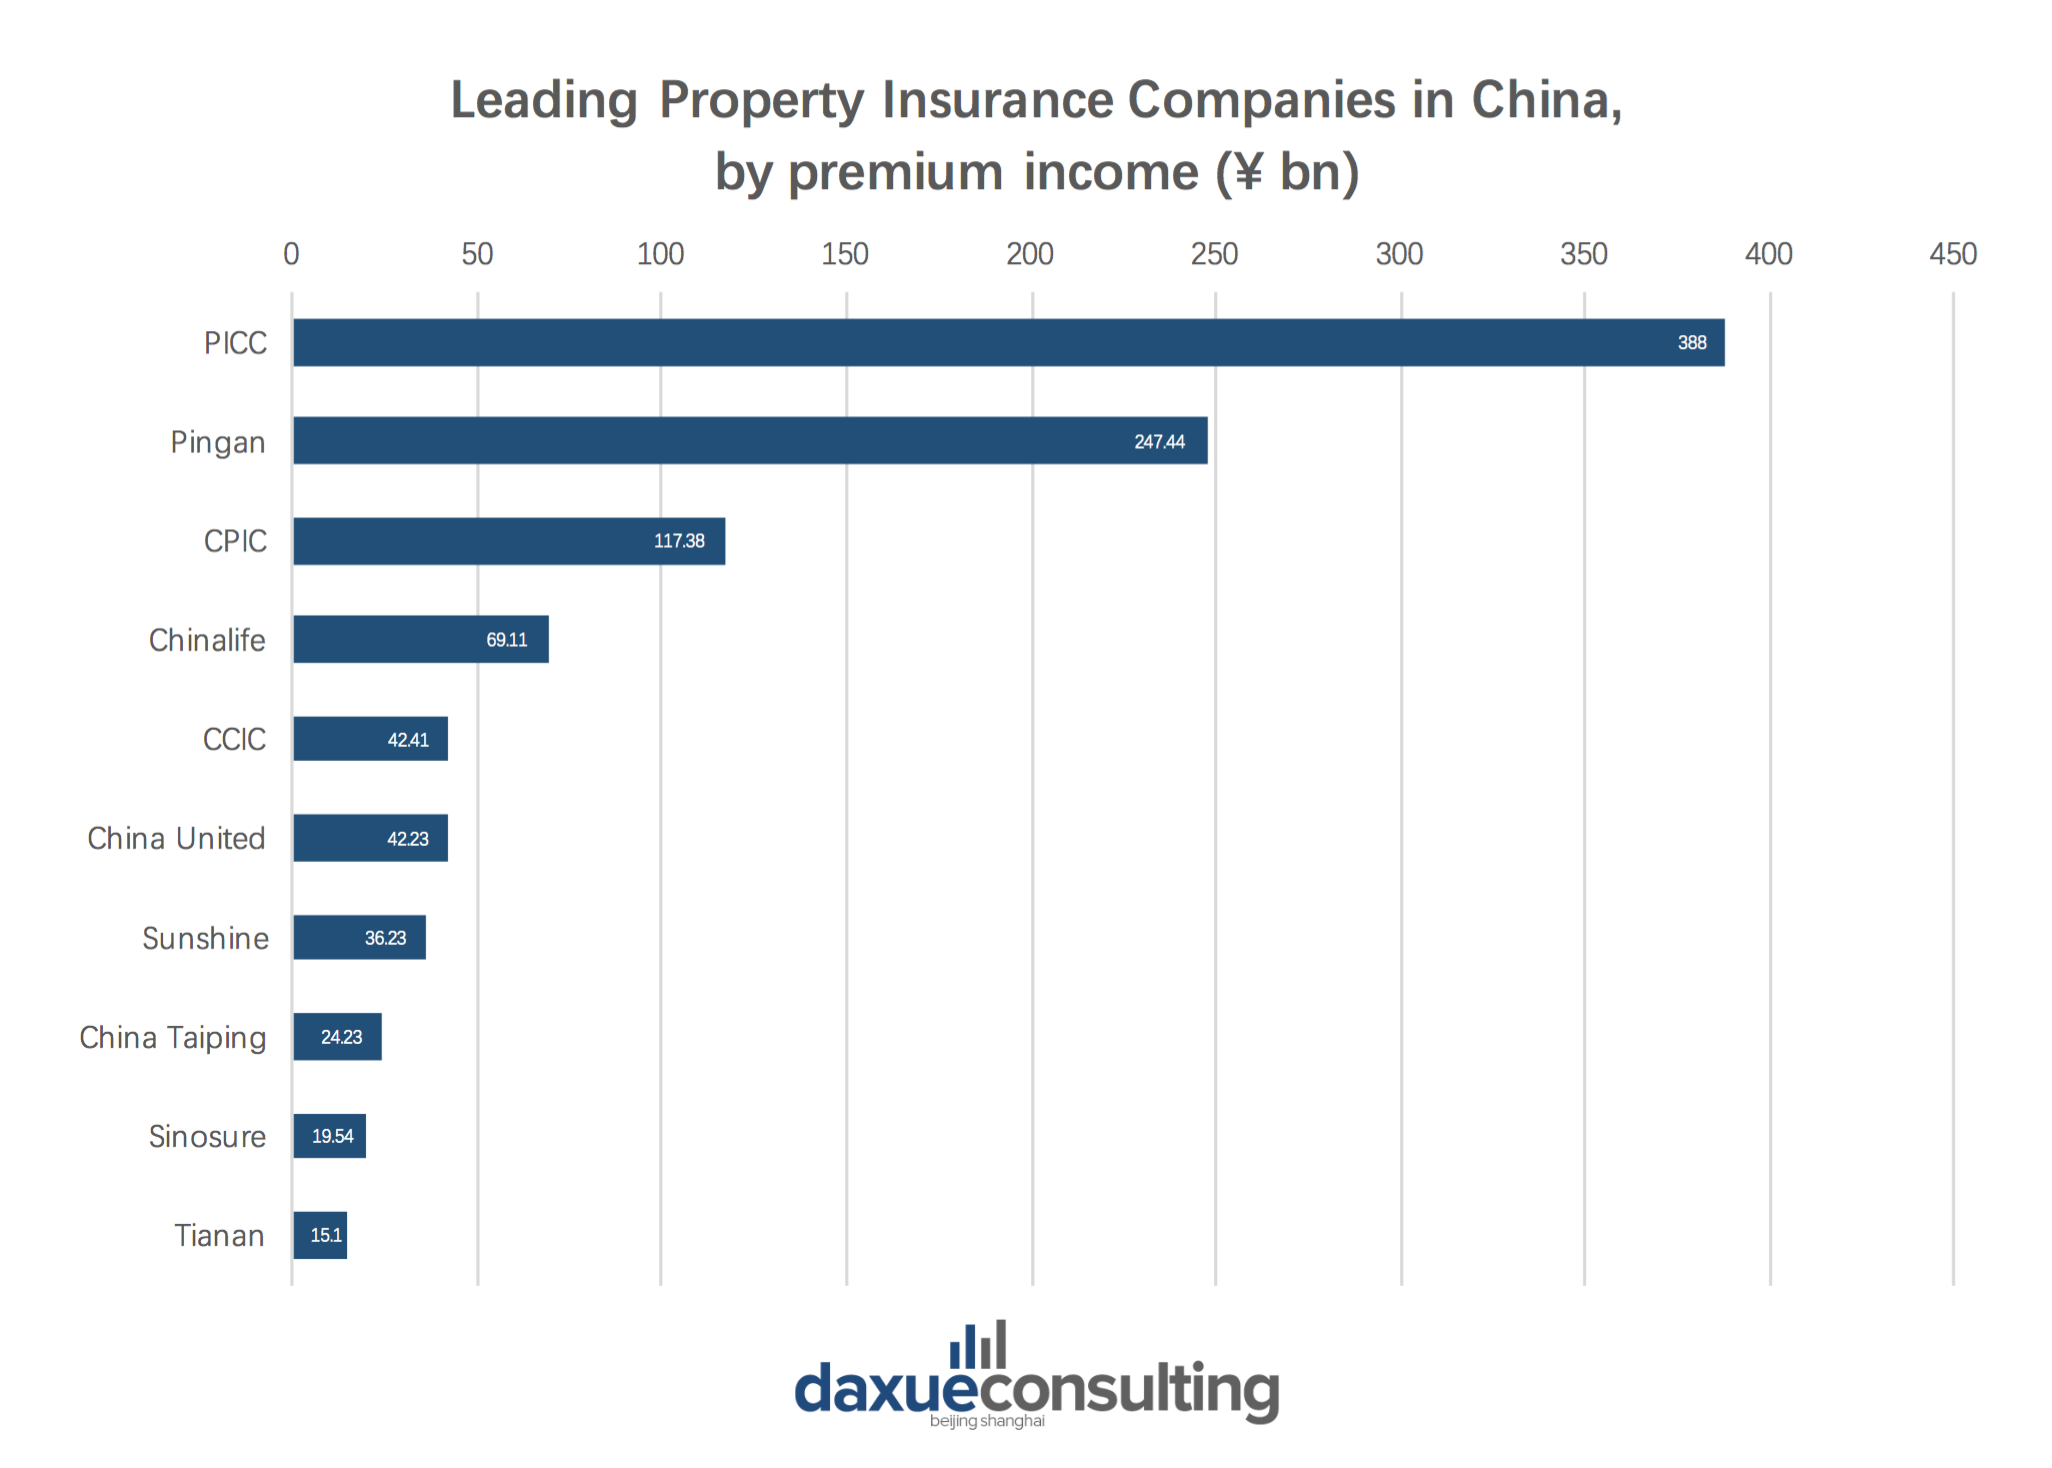 Leading property insurance companies in China